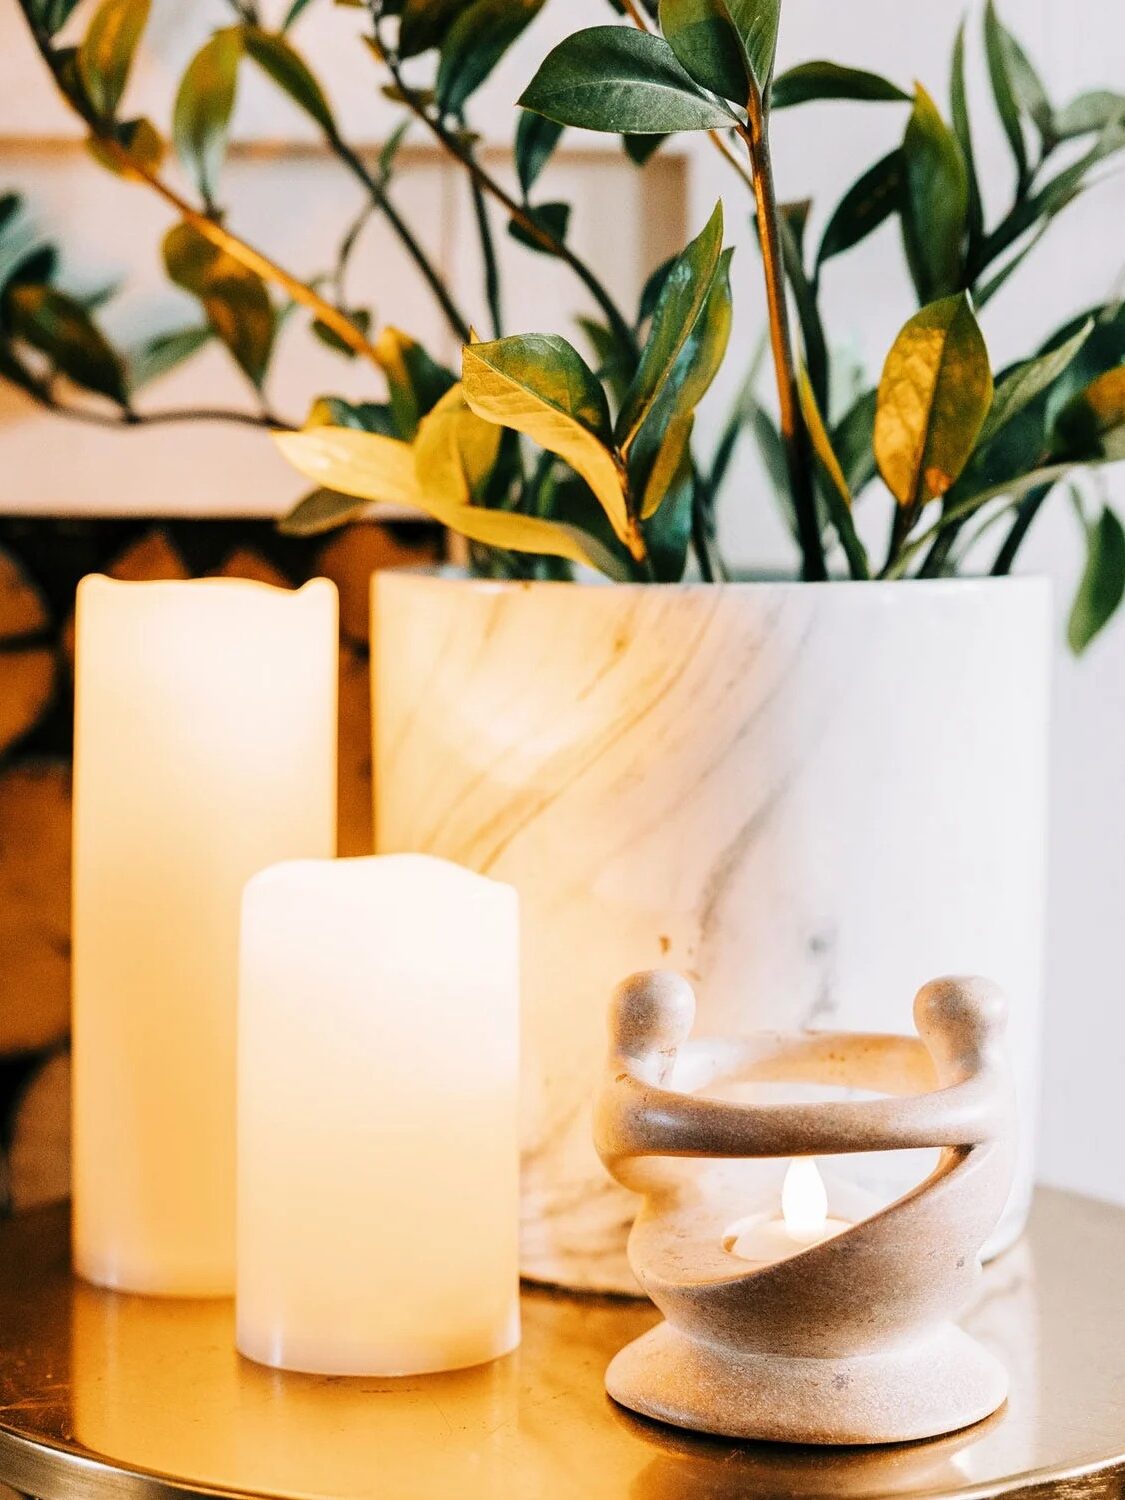 Two led candles and a small ceramic candle holder with a lit candle on a golden table beside a plant in a white pot.